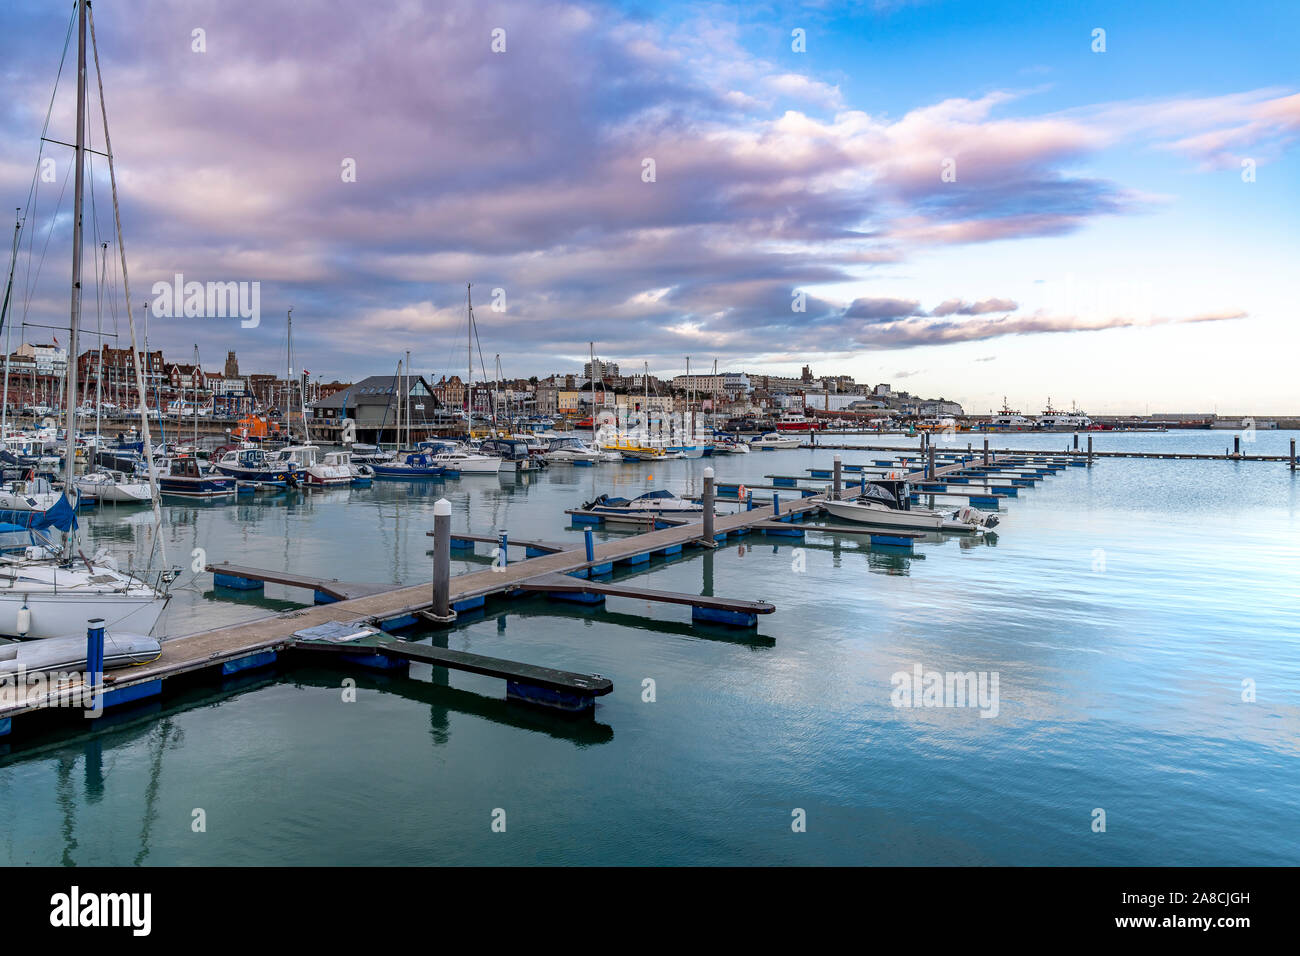 Late evening at Ramsgate harbour. With fishing boats, yachts, little boats and speed boats. Deep blue skies and reflections on the sea. Stock Photo